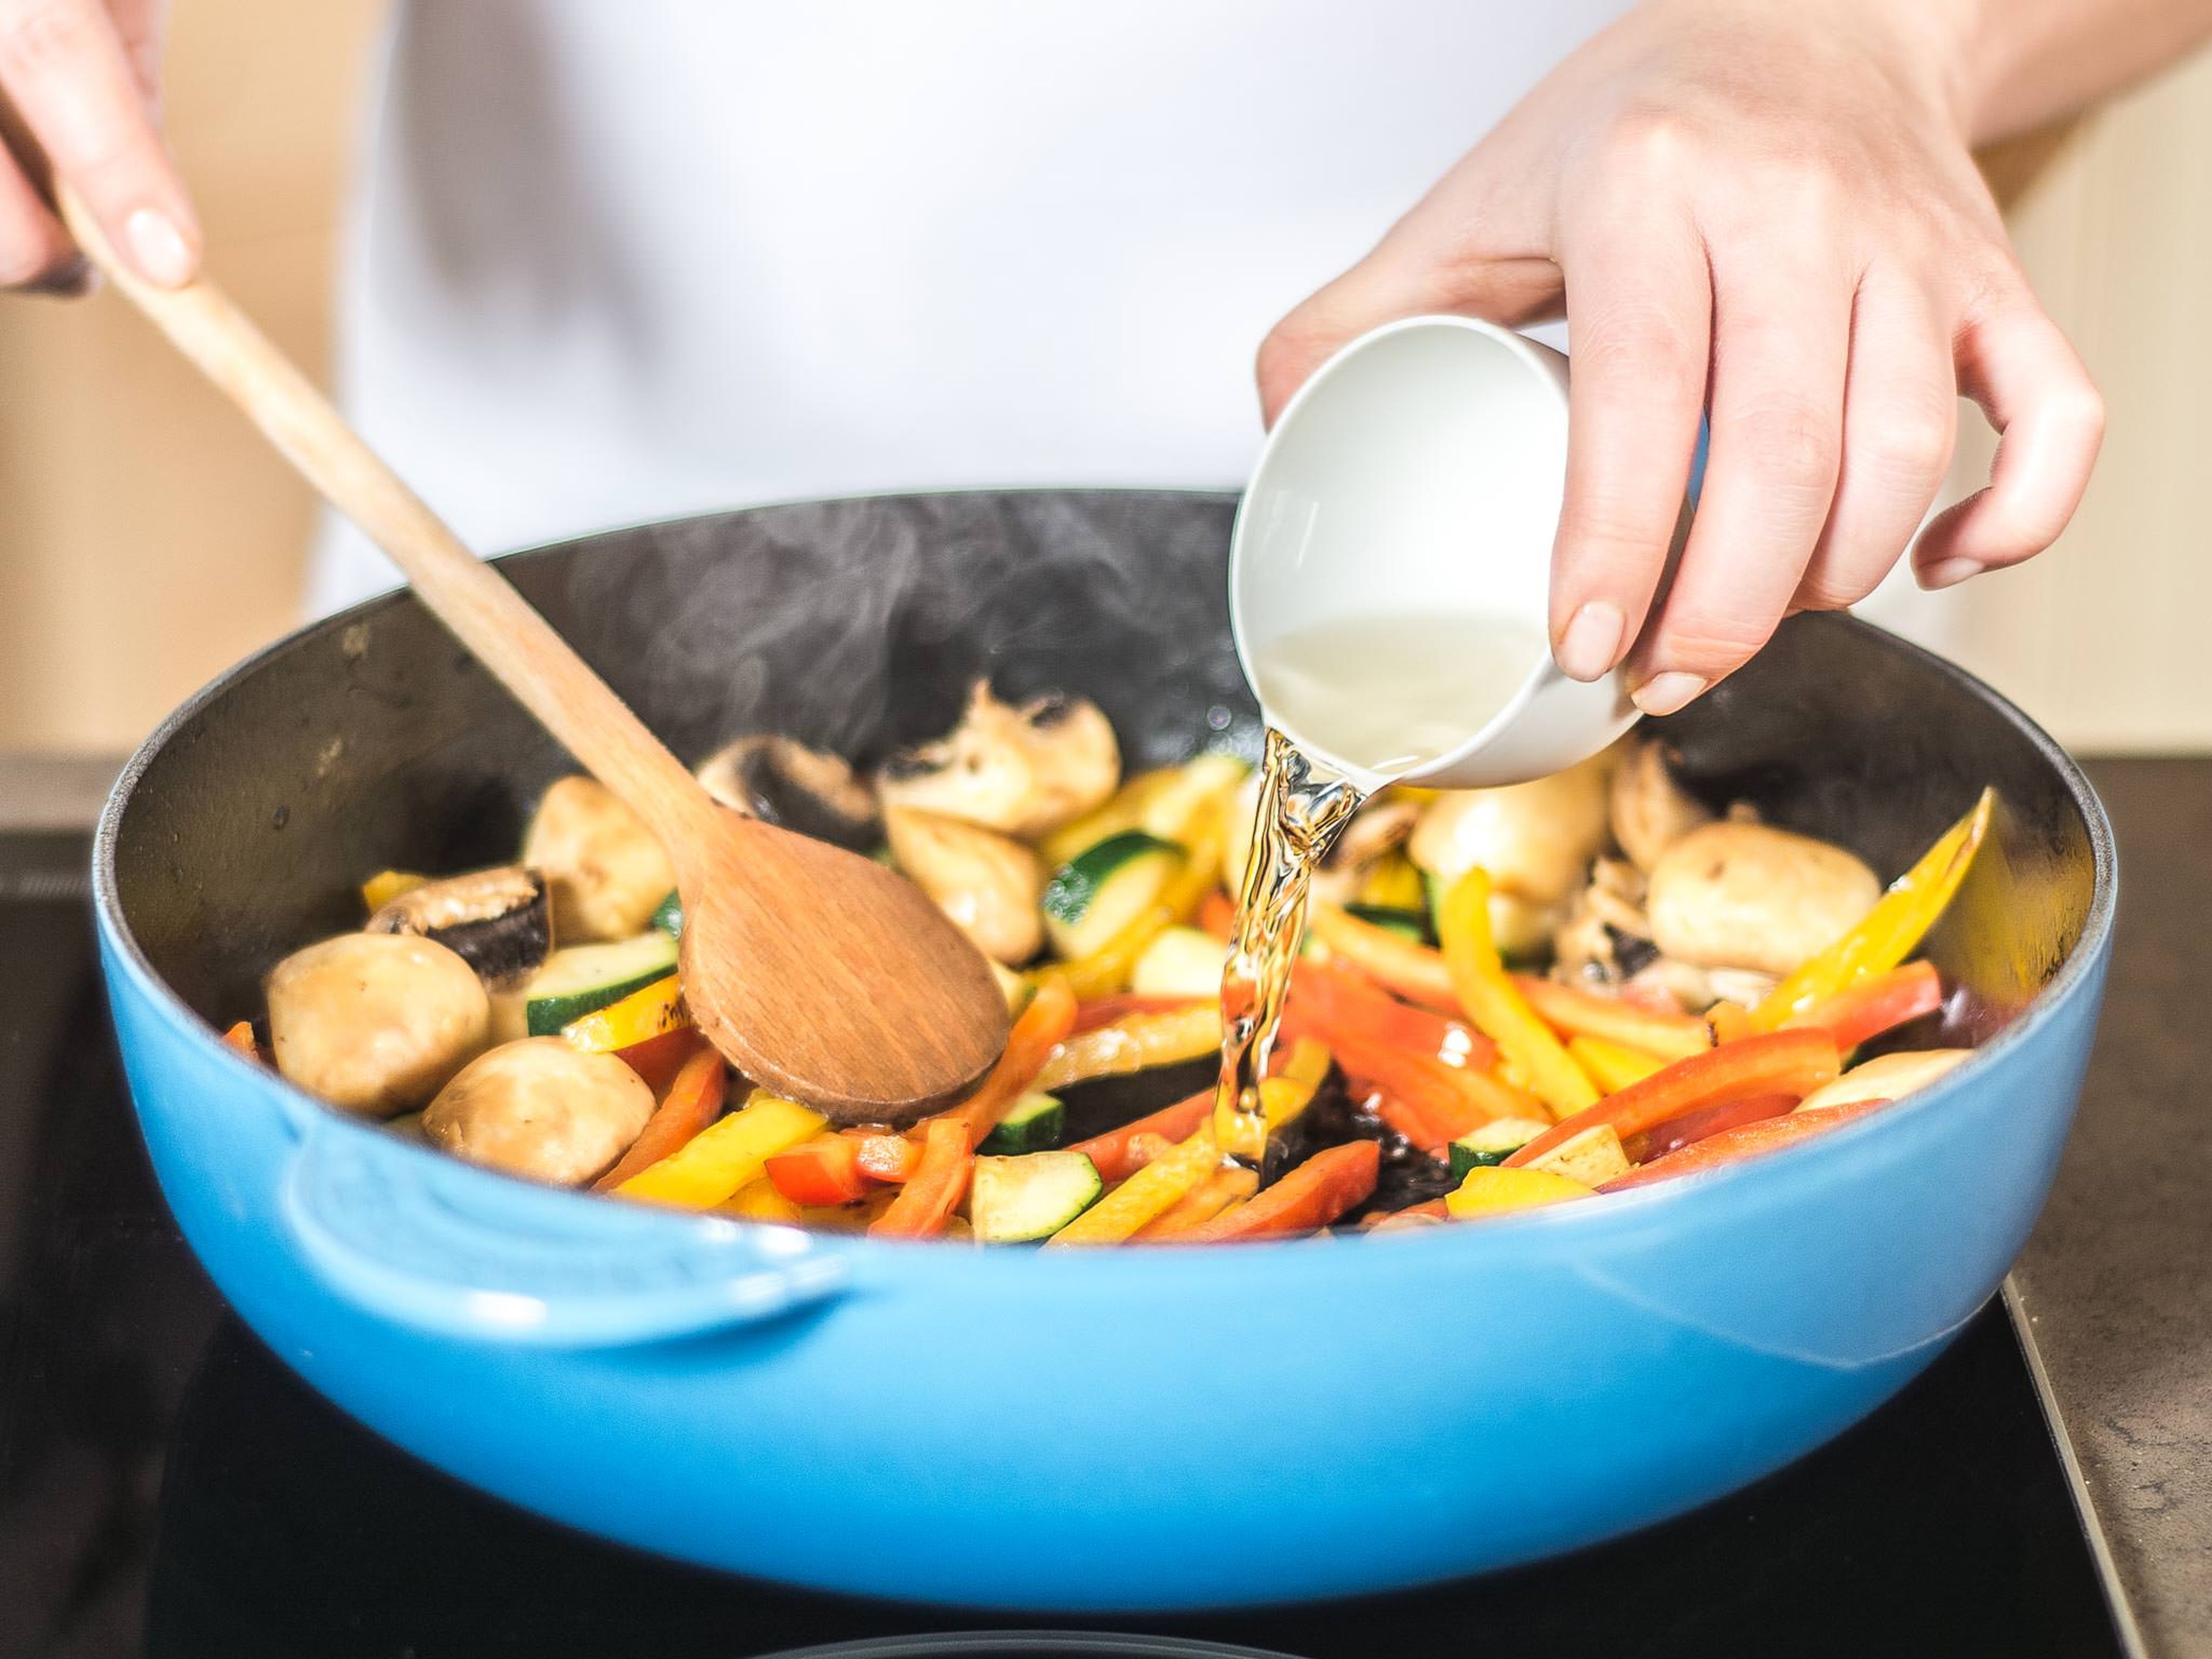 Sauté the vegetables in a hot pan with some vegetable oil and season with sugar, salt, and pepper. Deglaze with white wine vinegar and remove the pan from the heat.